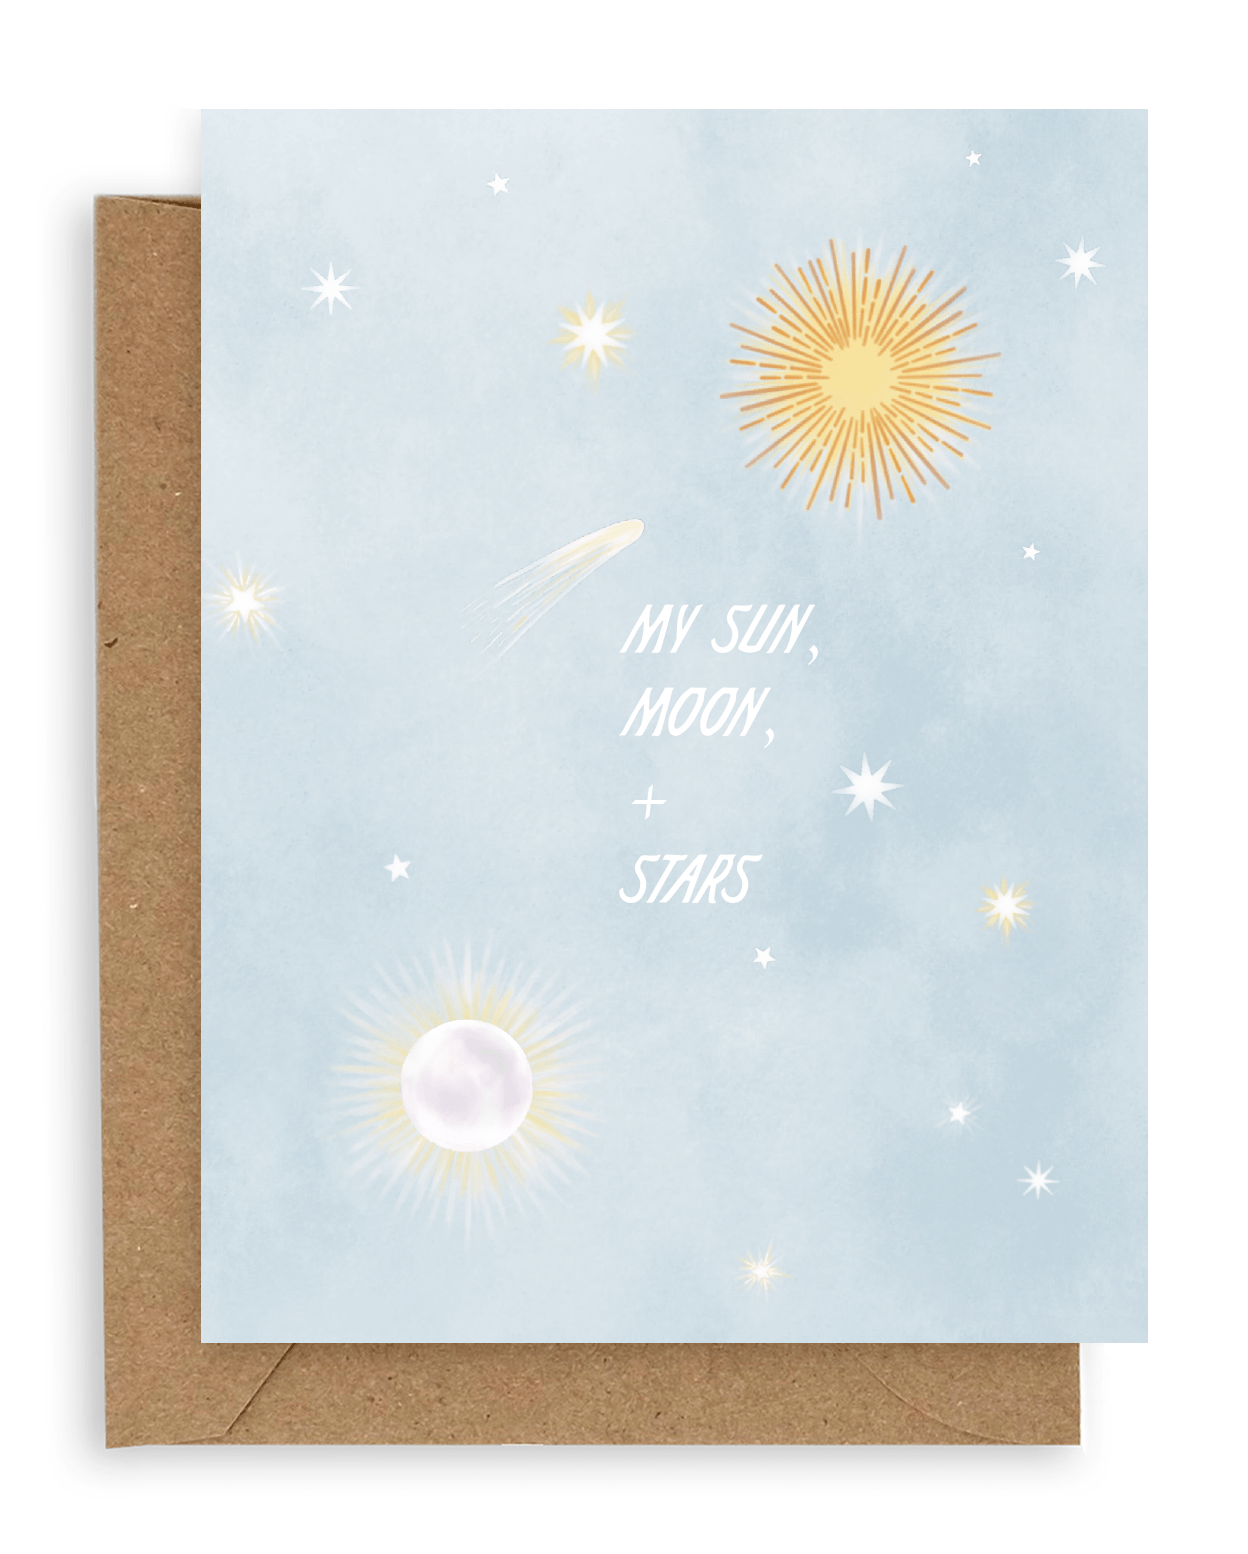 Blue sky with sun, moon, stars and text that reads "My Sun, Moon, + Stars." Shown with kraft envelope.